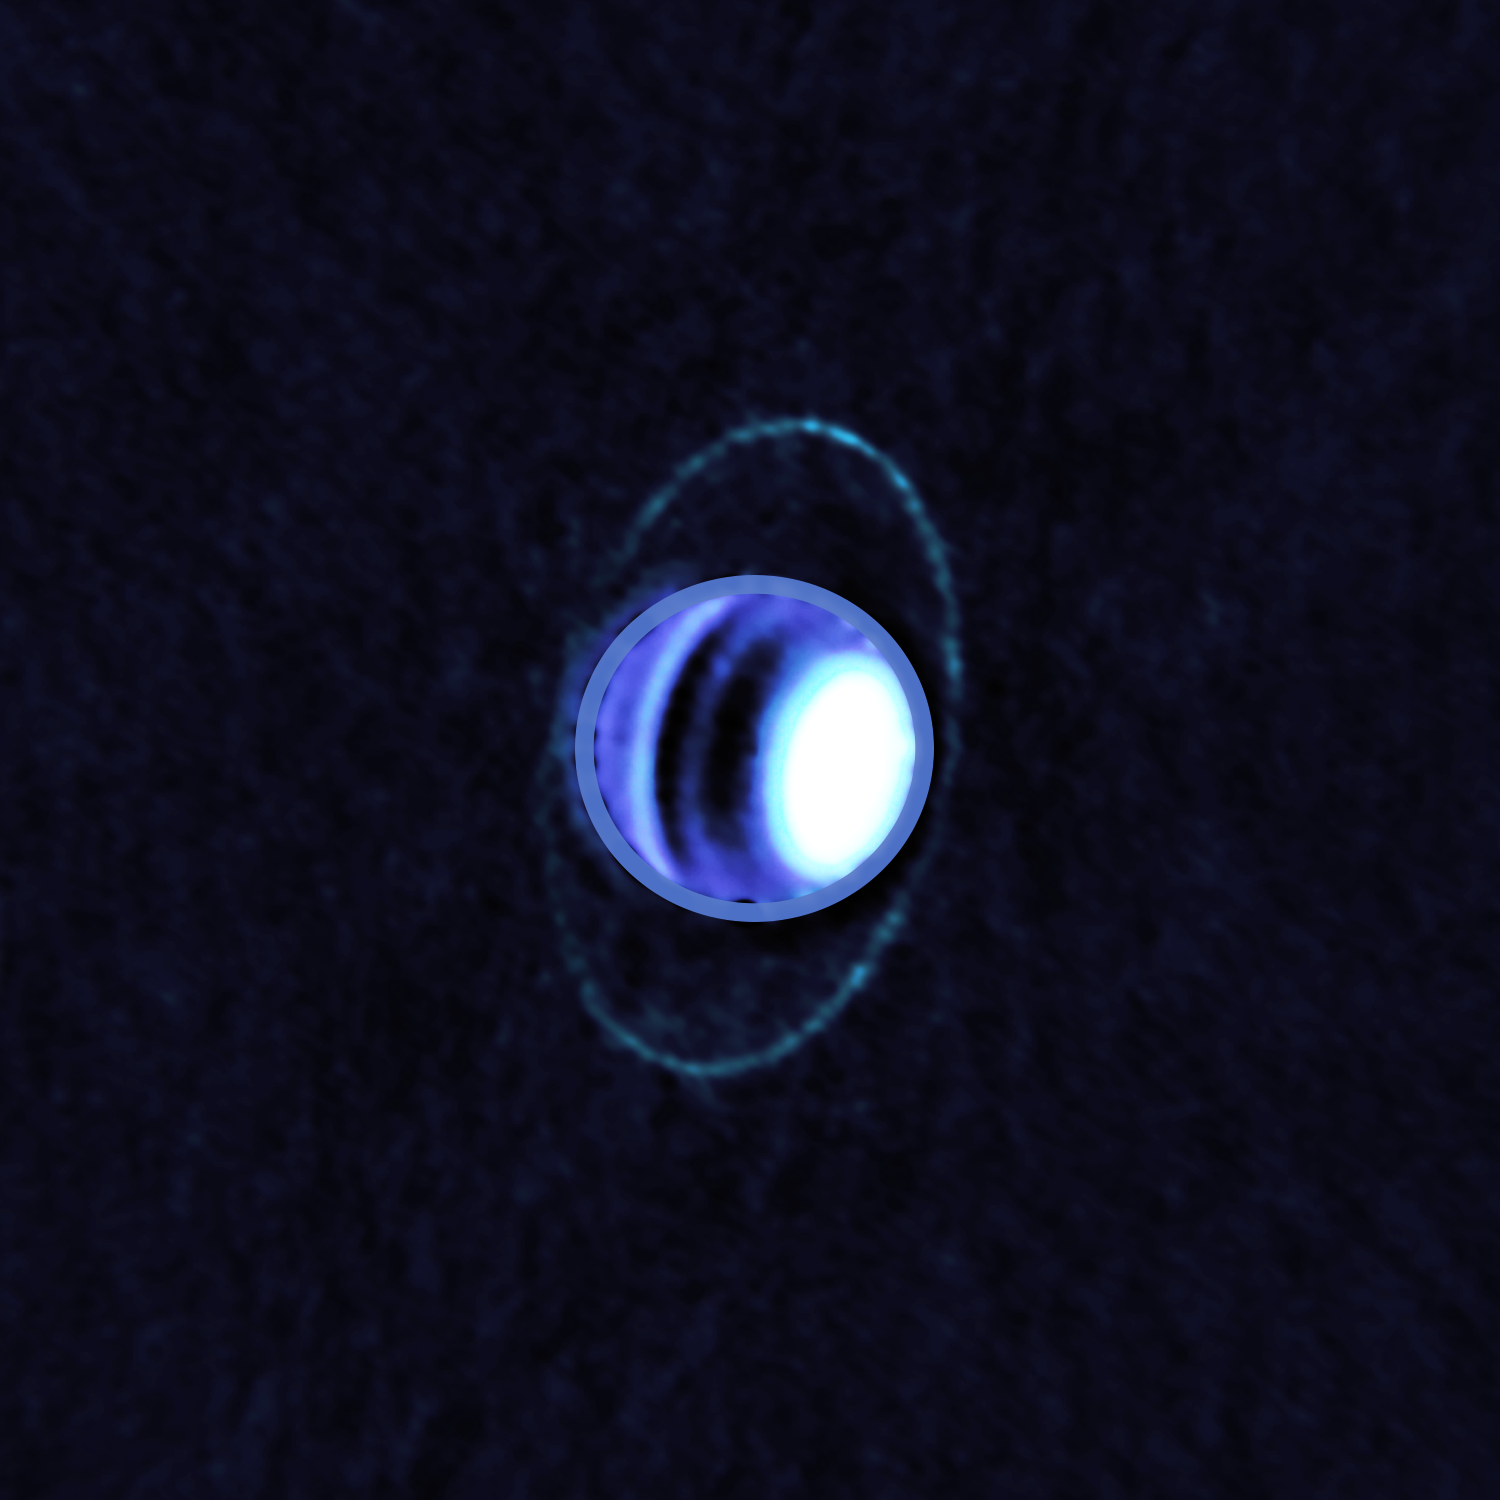 blue planets with rings